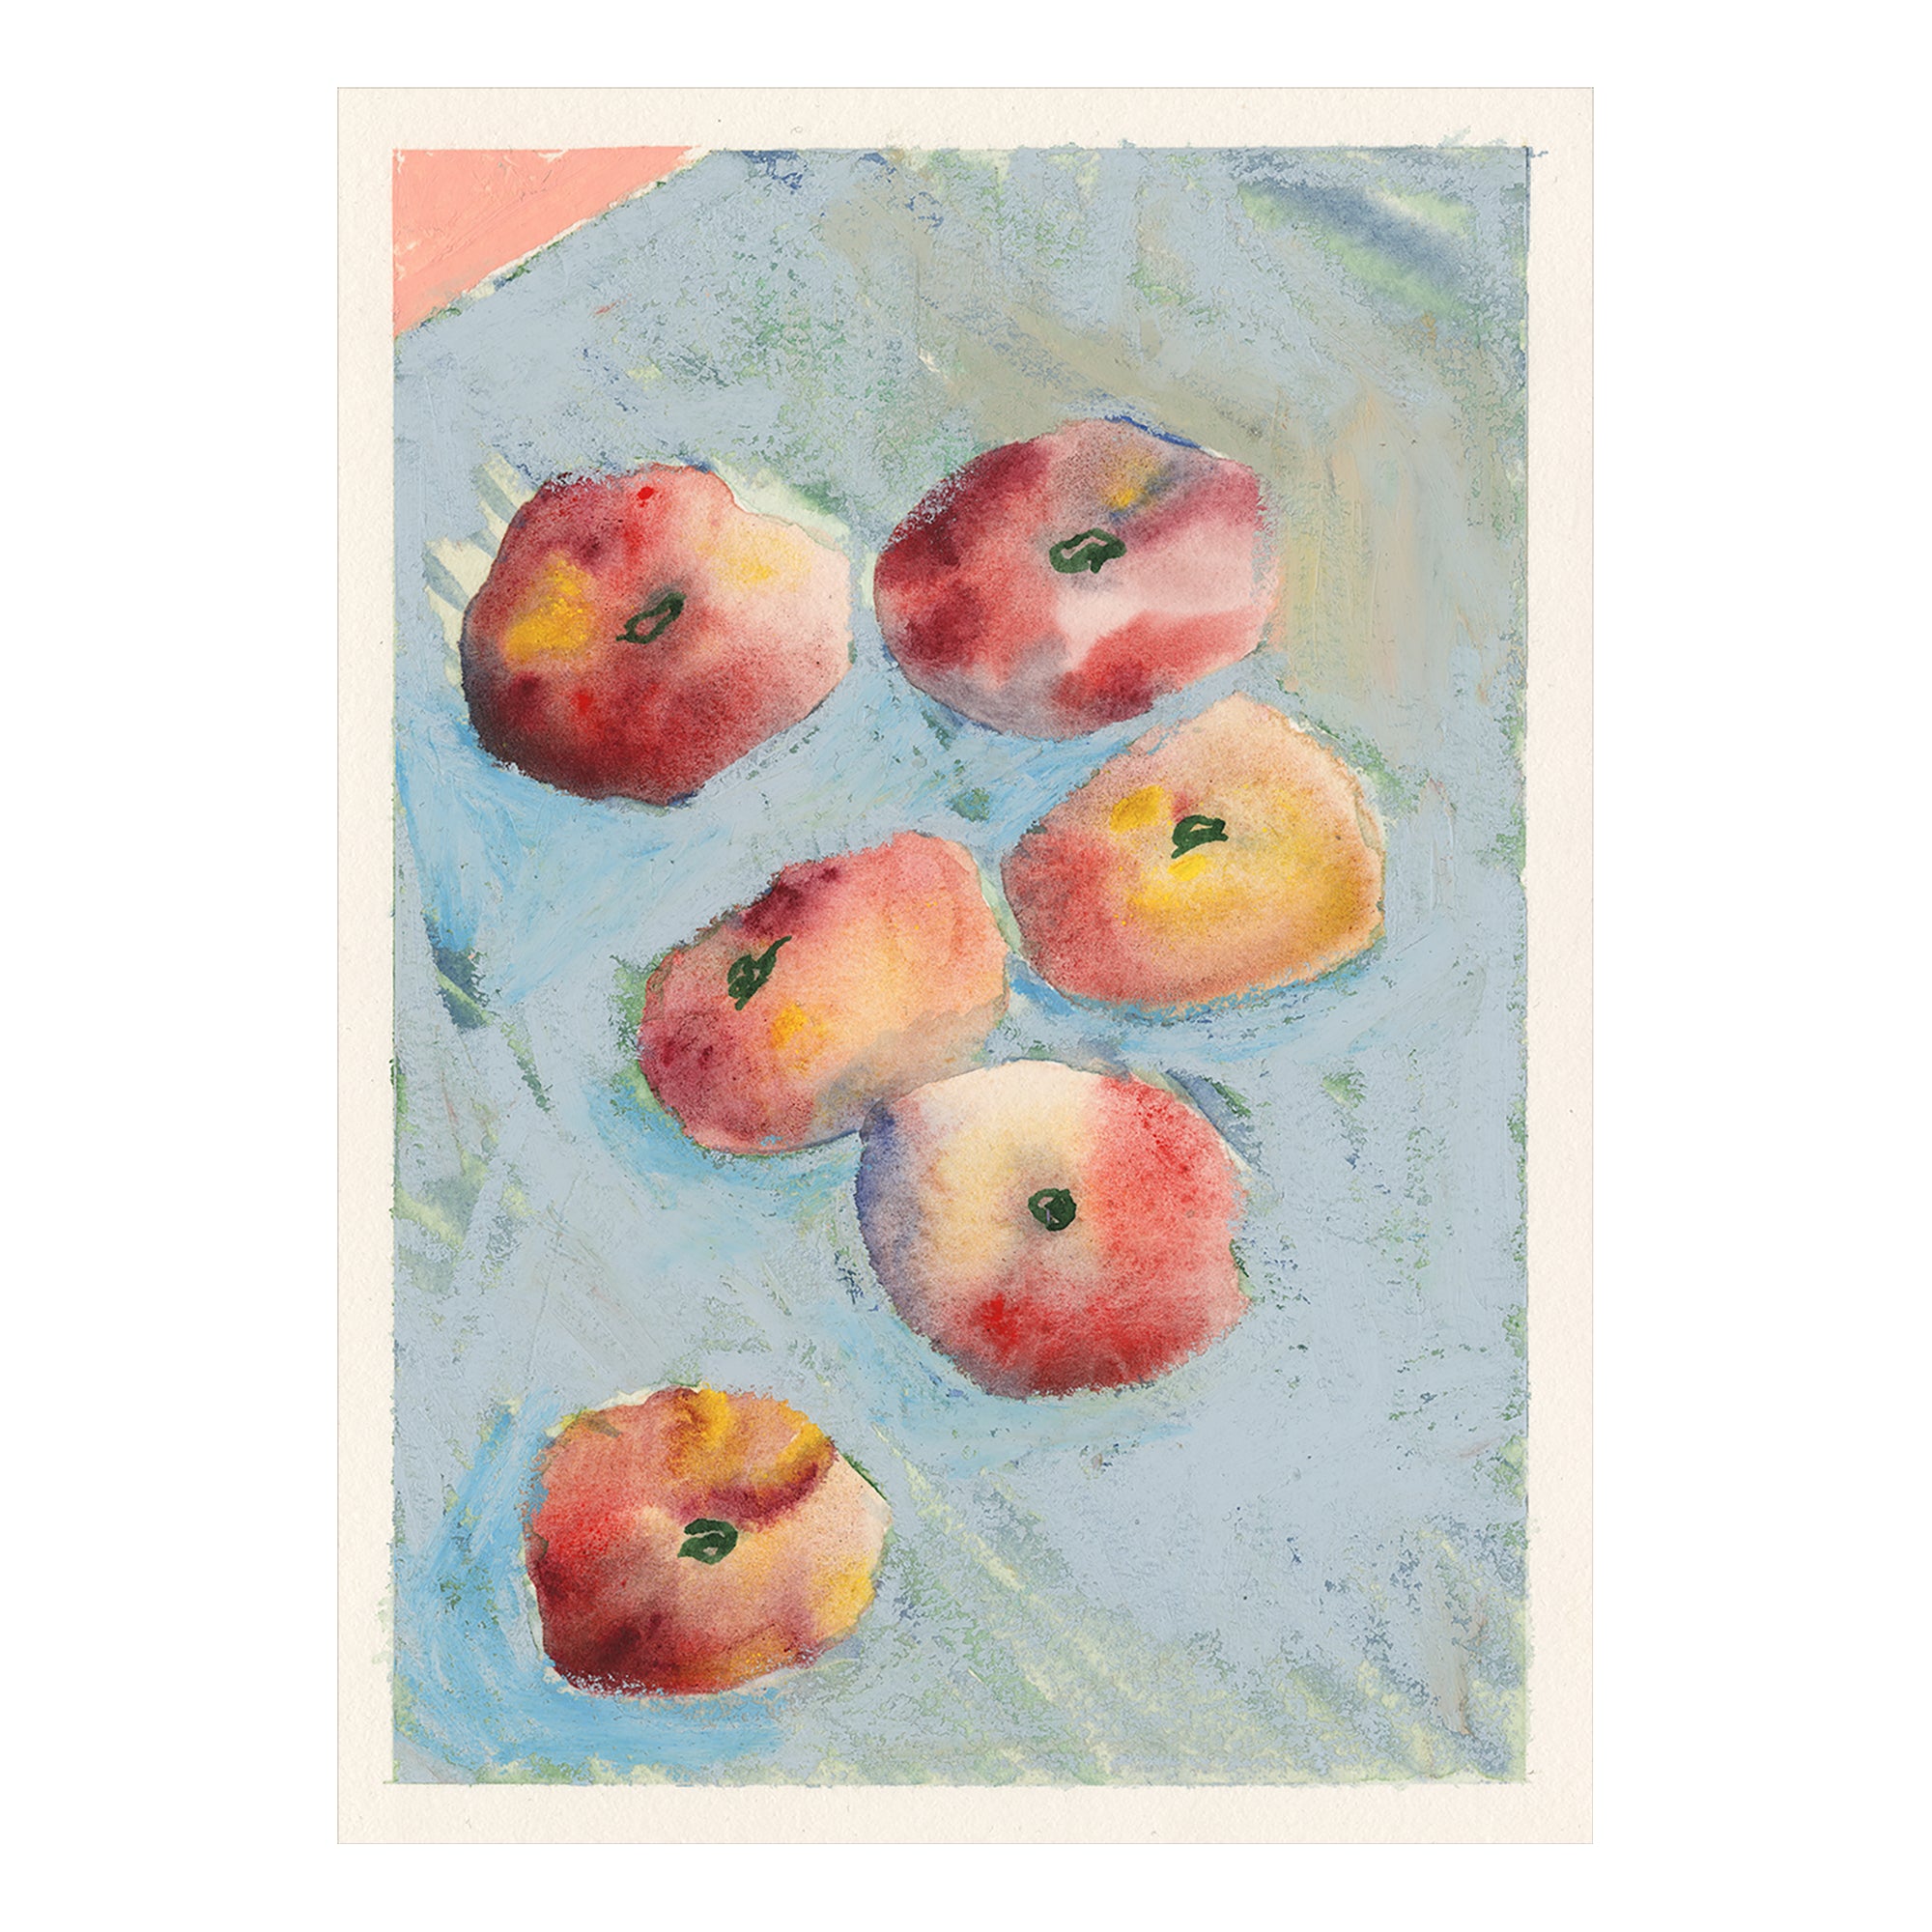 Peaches by Liat Greenberg